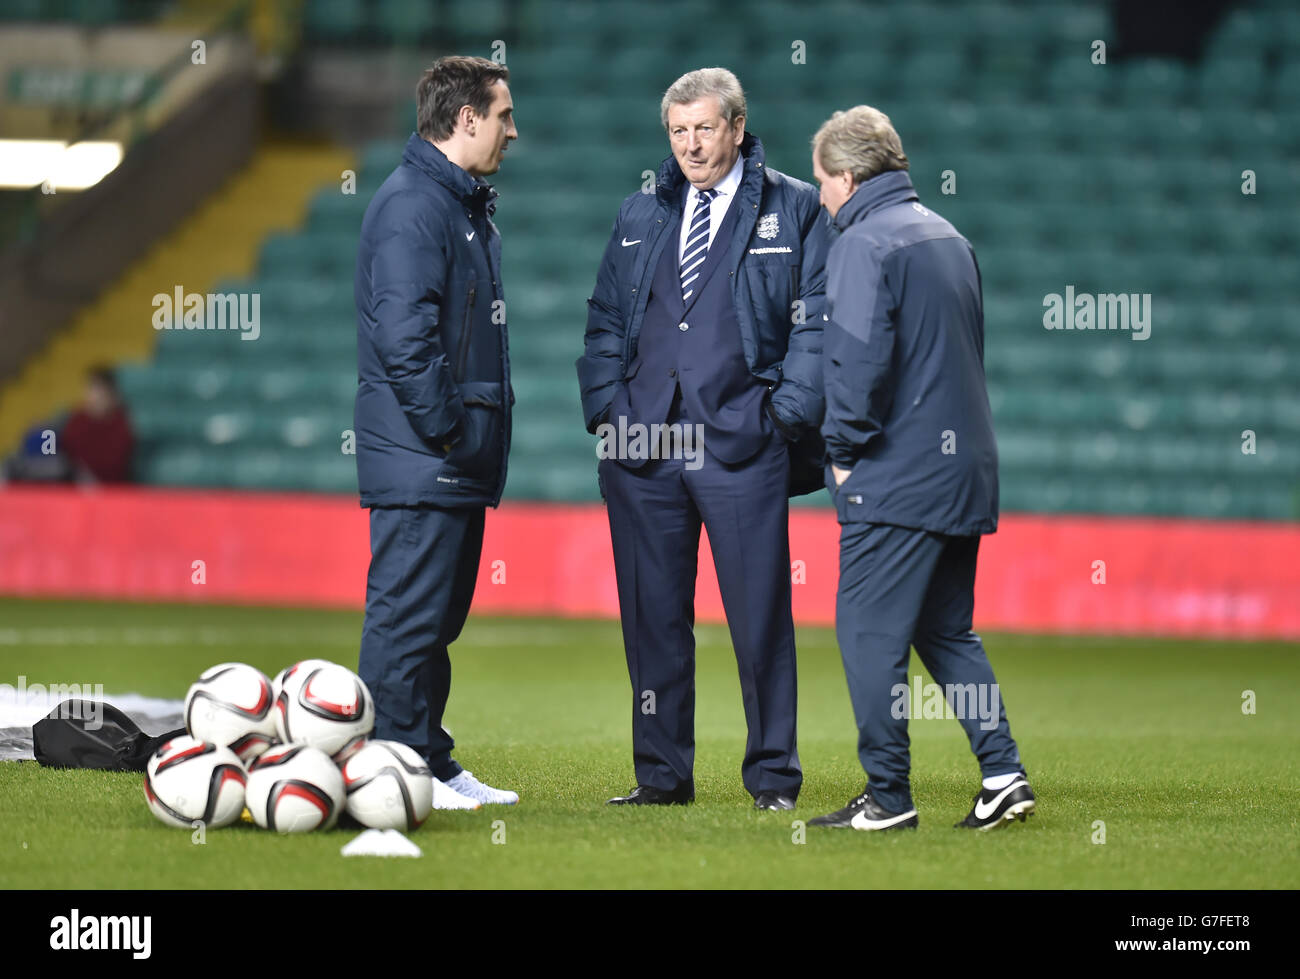 England manager Roy Hodgson (centre), assistant manager Ray Lewington (right) and coach Gary Neville before the International friendly at Celtic Park, Glasgow. PRESS ASSOCIATION Photo. Picture date: Tuesday November 18, 2014. See PA Story SOCCER Scotland. Photo credit should read: Owen Humphreys/PA Wire. Stock Photo